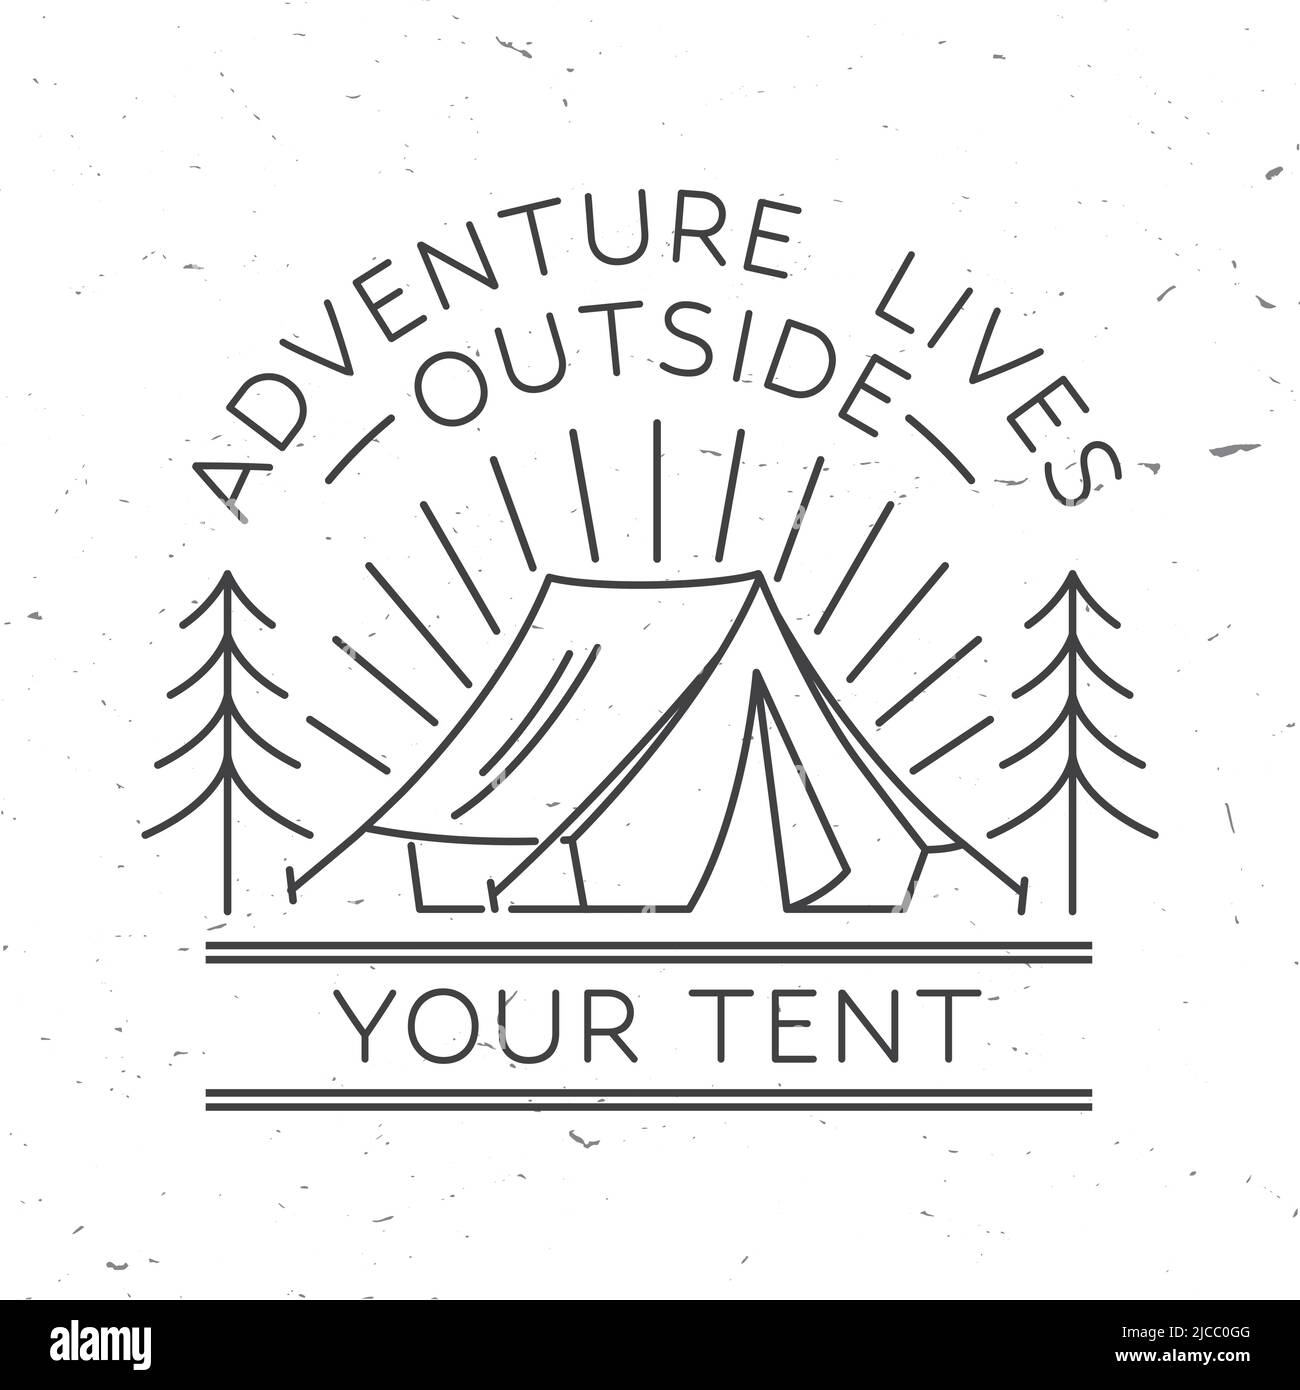 Adventure lives outside your tent. Vector illustration. Concept for shirt or logo, print, stamp or tee. Vintage line art design with camping tent and Stock Vector